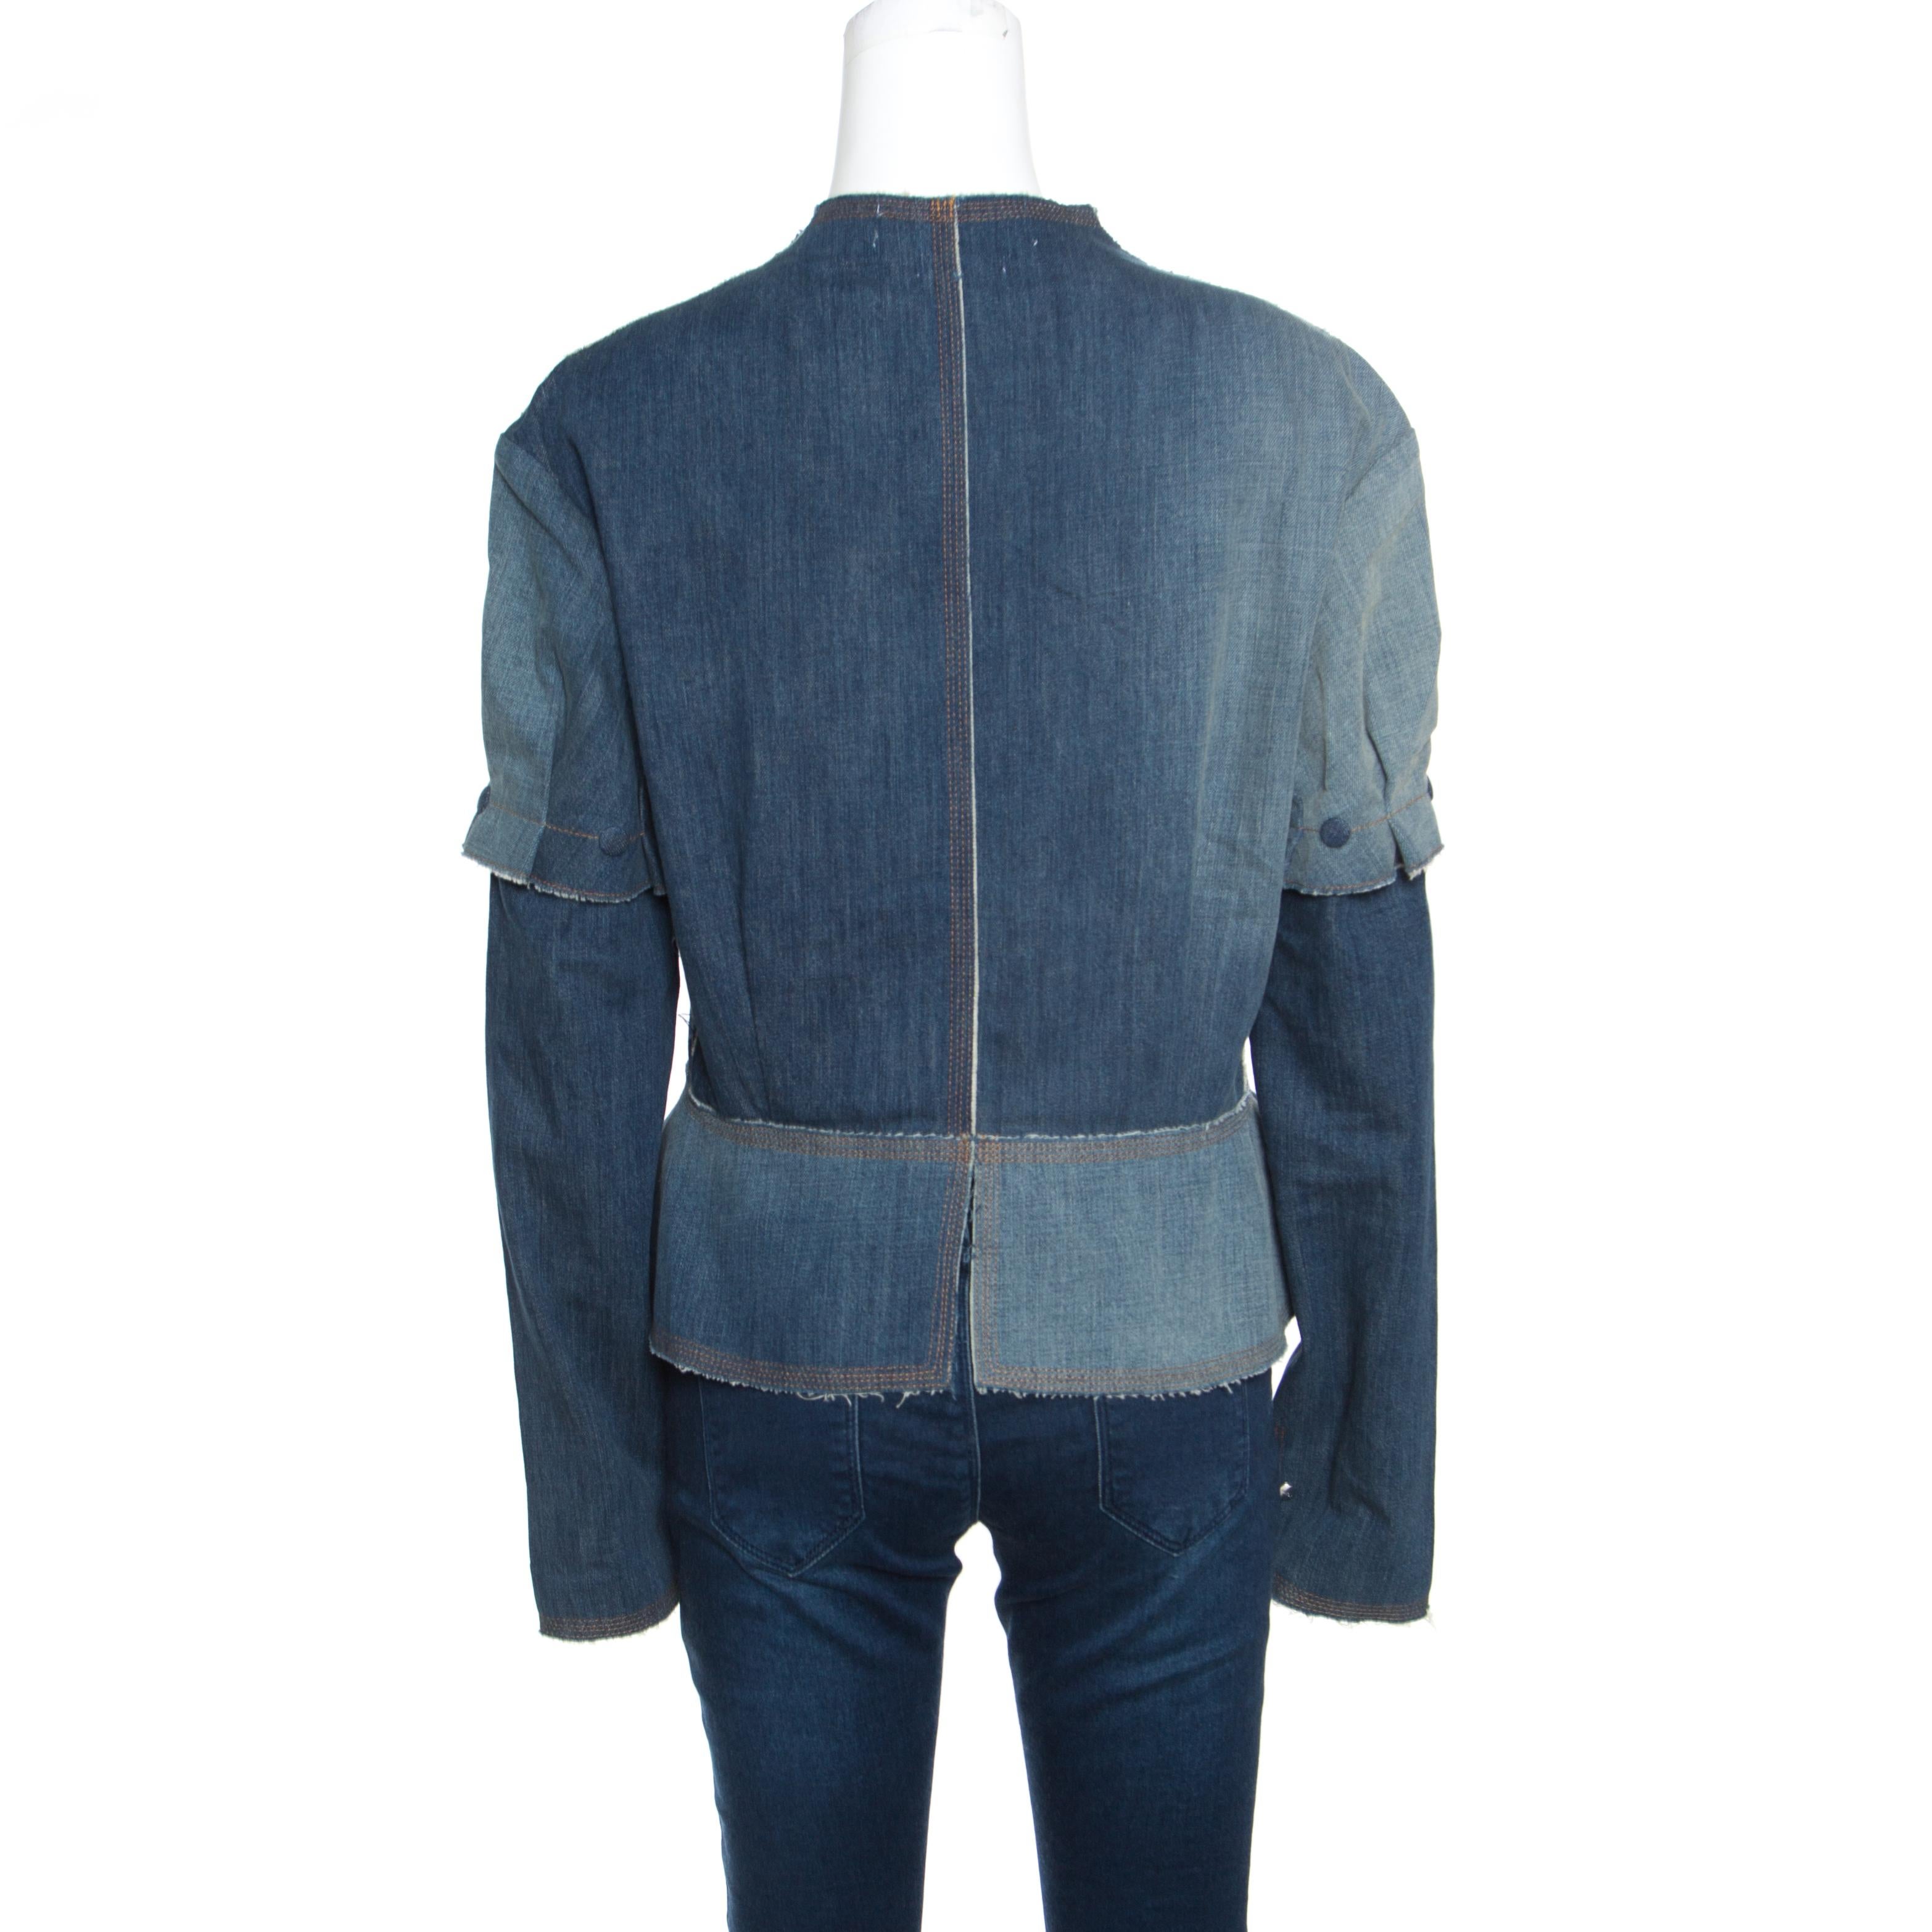 This jacket from Loewe appears to have been made for a fashion diva like yourself. The creation is so edgy, it makes our hearts flutter and our closets to dance. It is tailored from denim and detailed with a leather trim that has frayed edges,